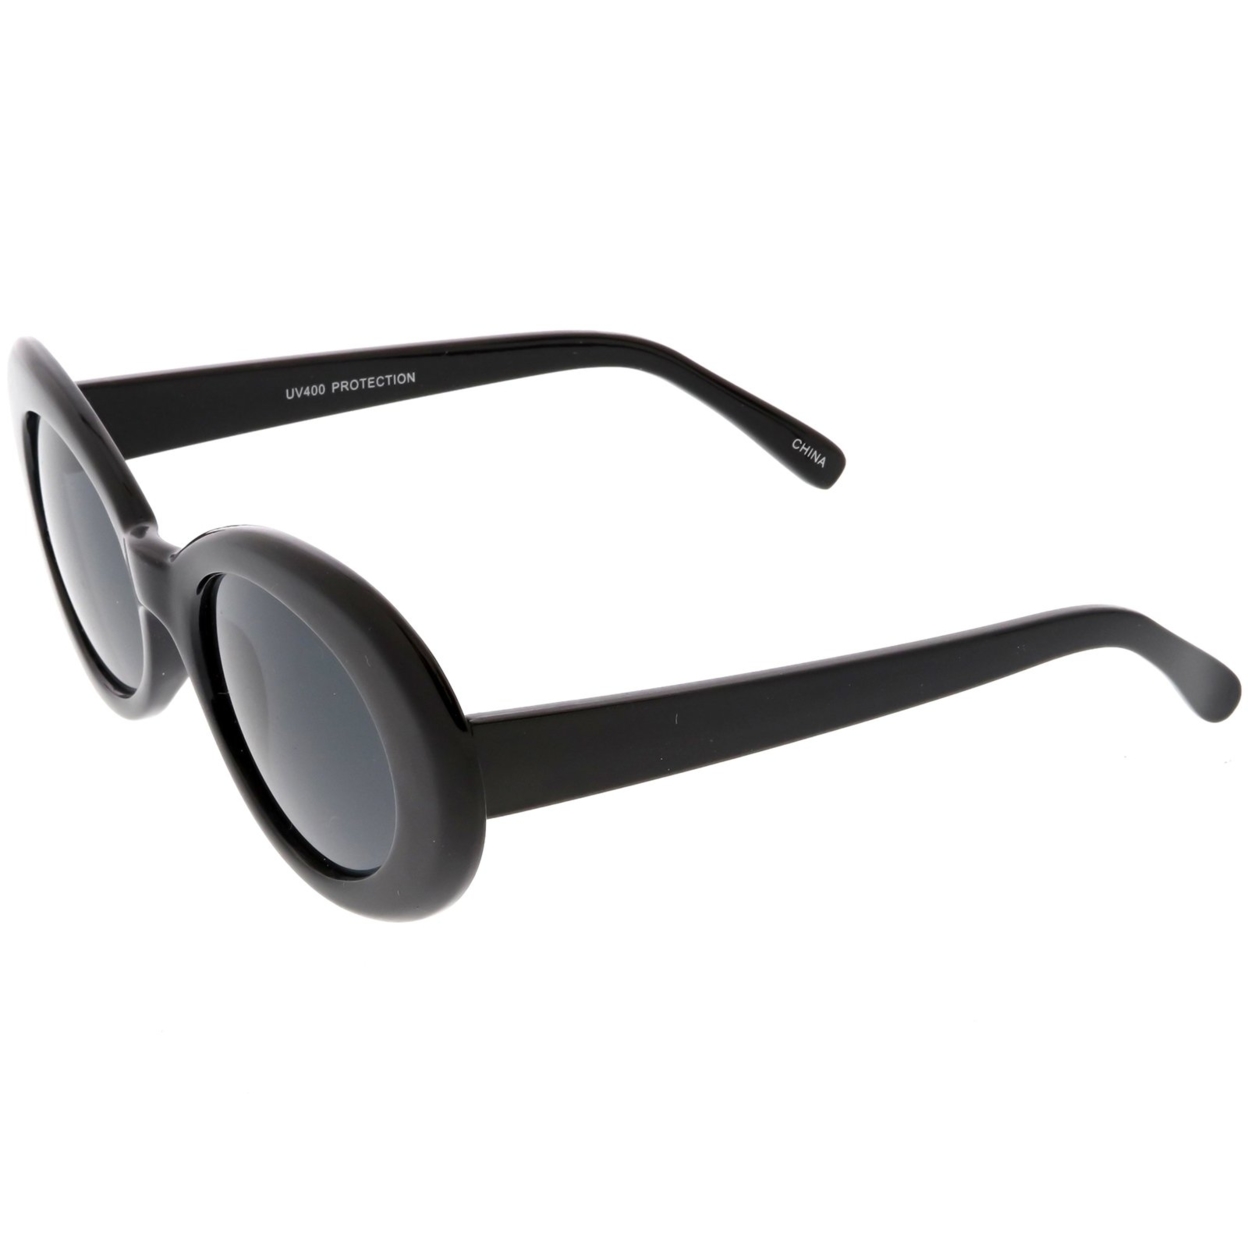 Large Retro Mod Oval Sunglasses Thick Frame Wide Arms Neutral Colored Lens 53mm - Black / Smoke